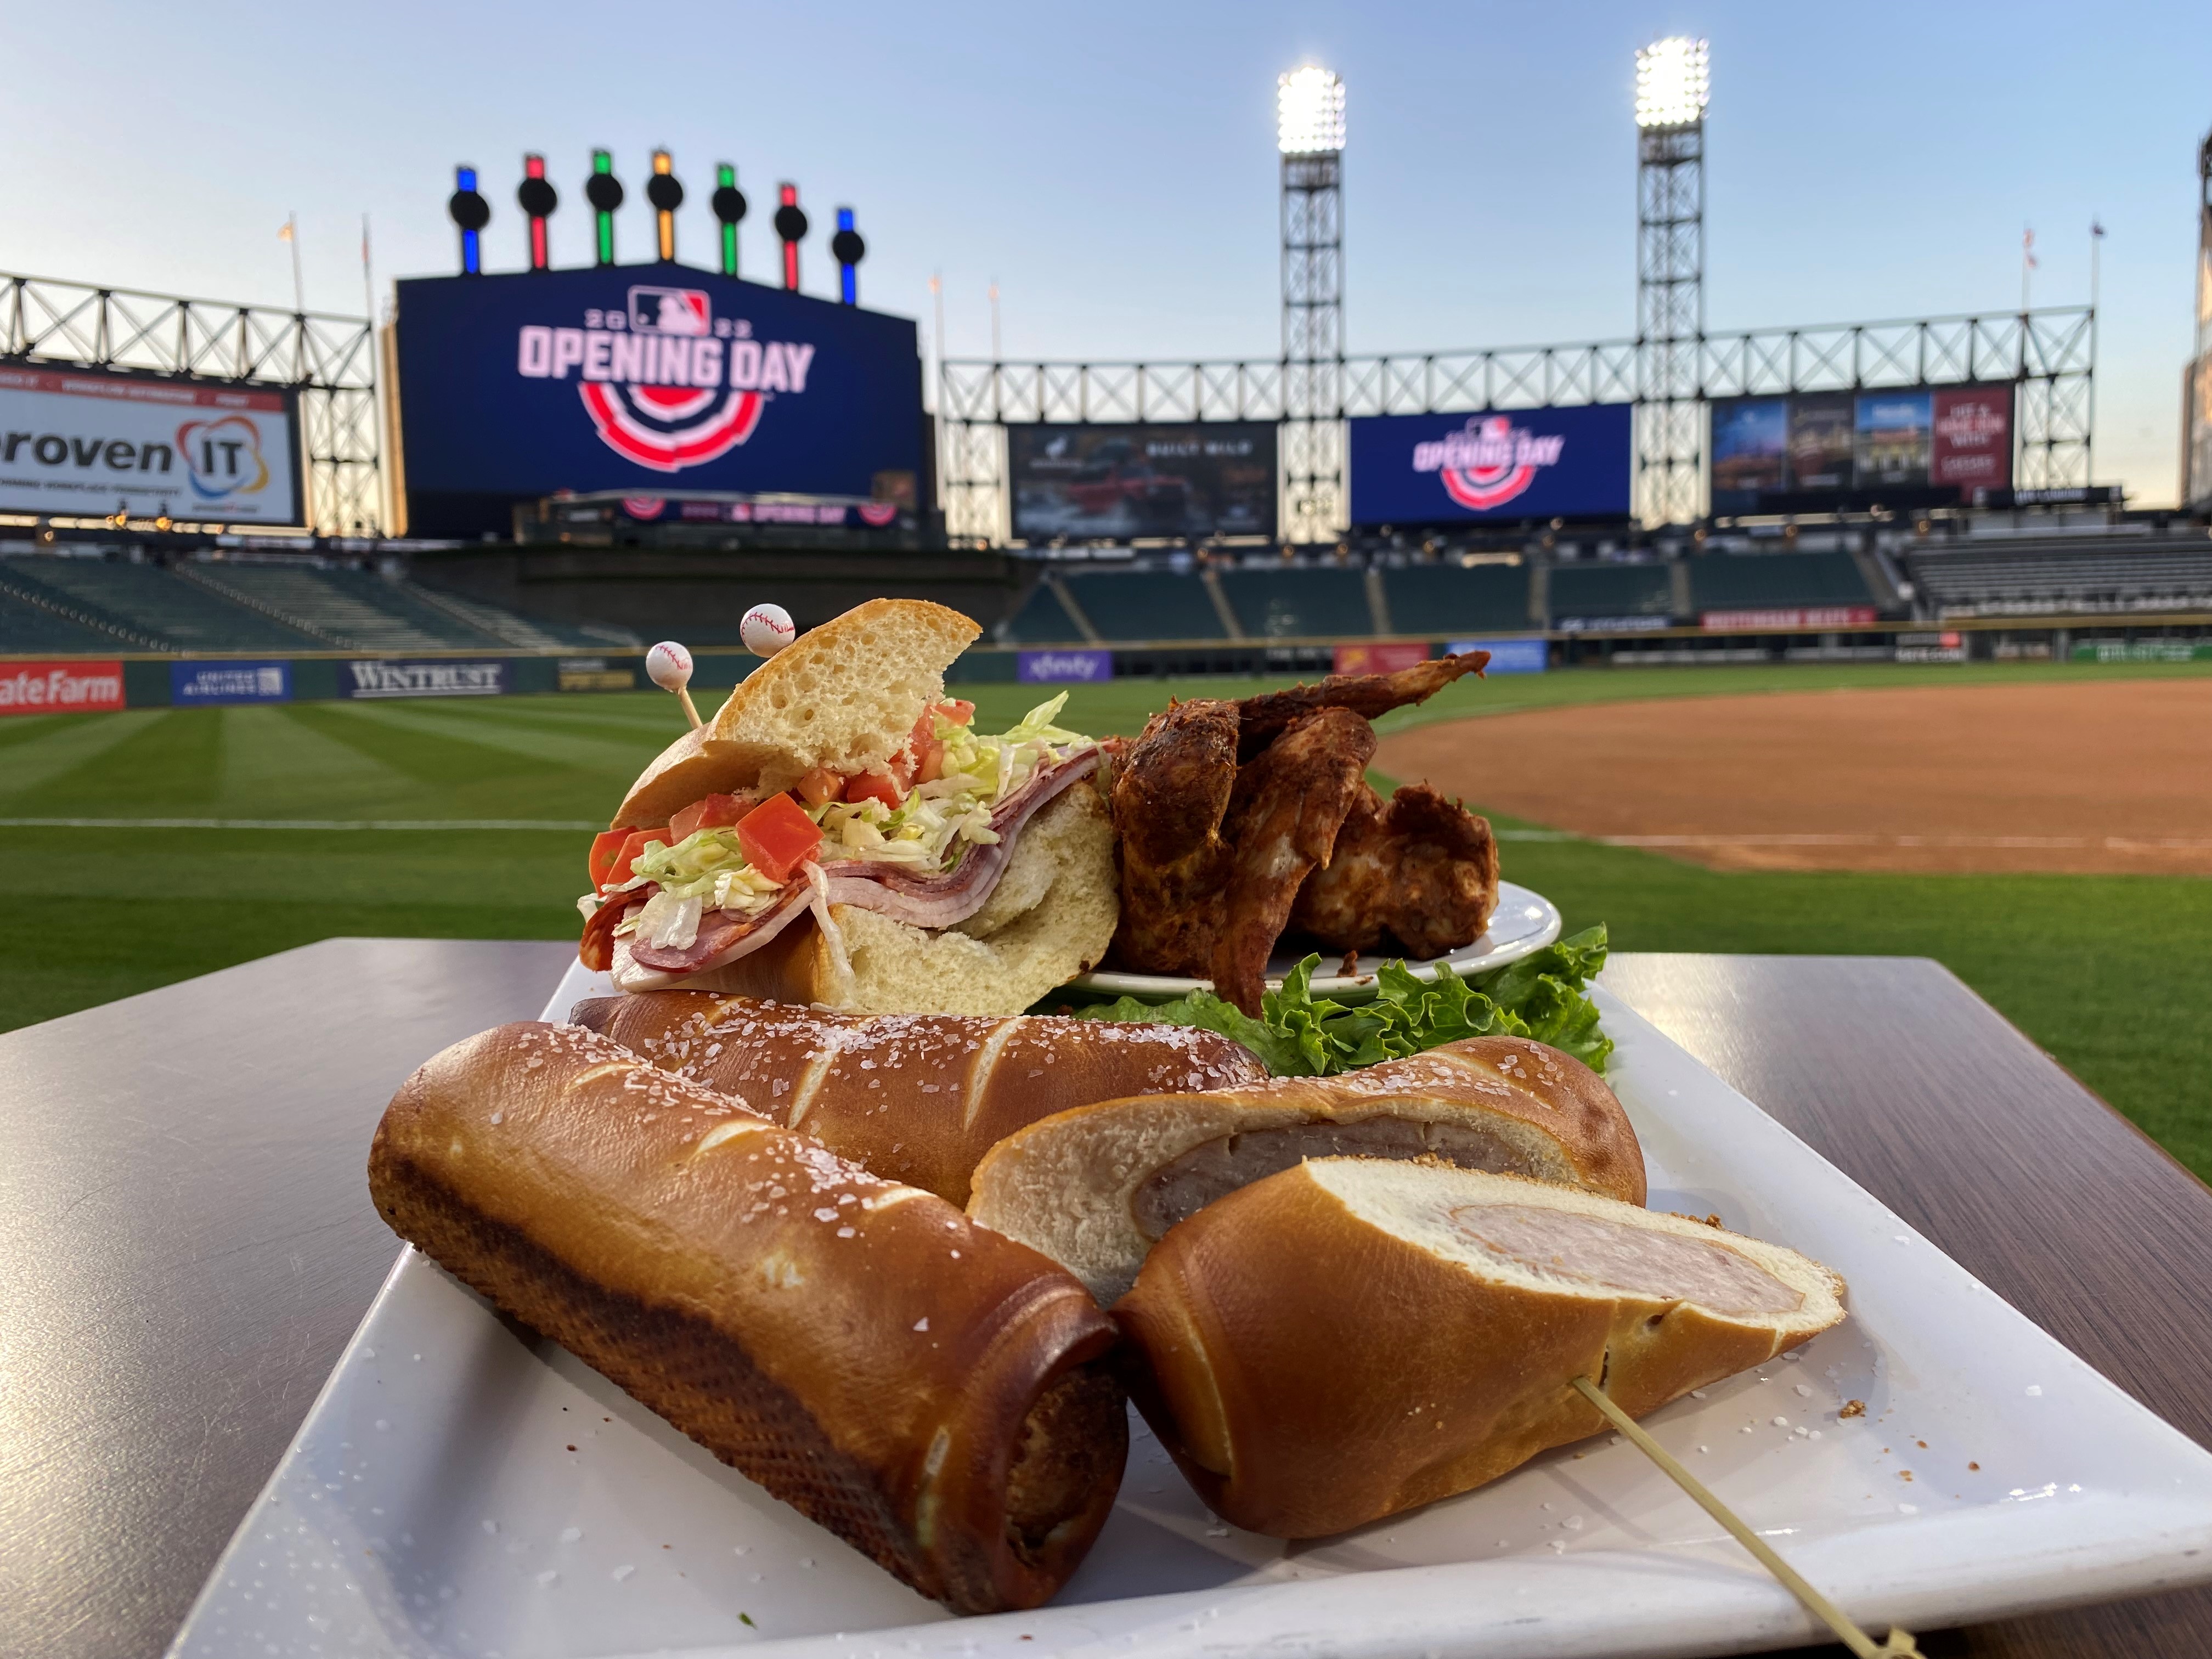 Chicago White Sox: Family traditions at the ballpark